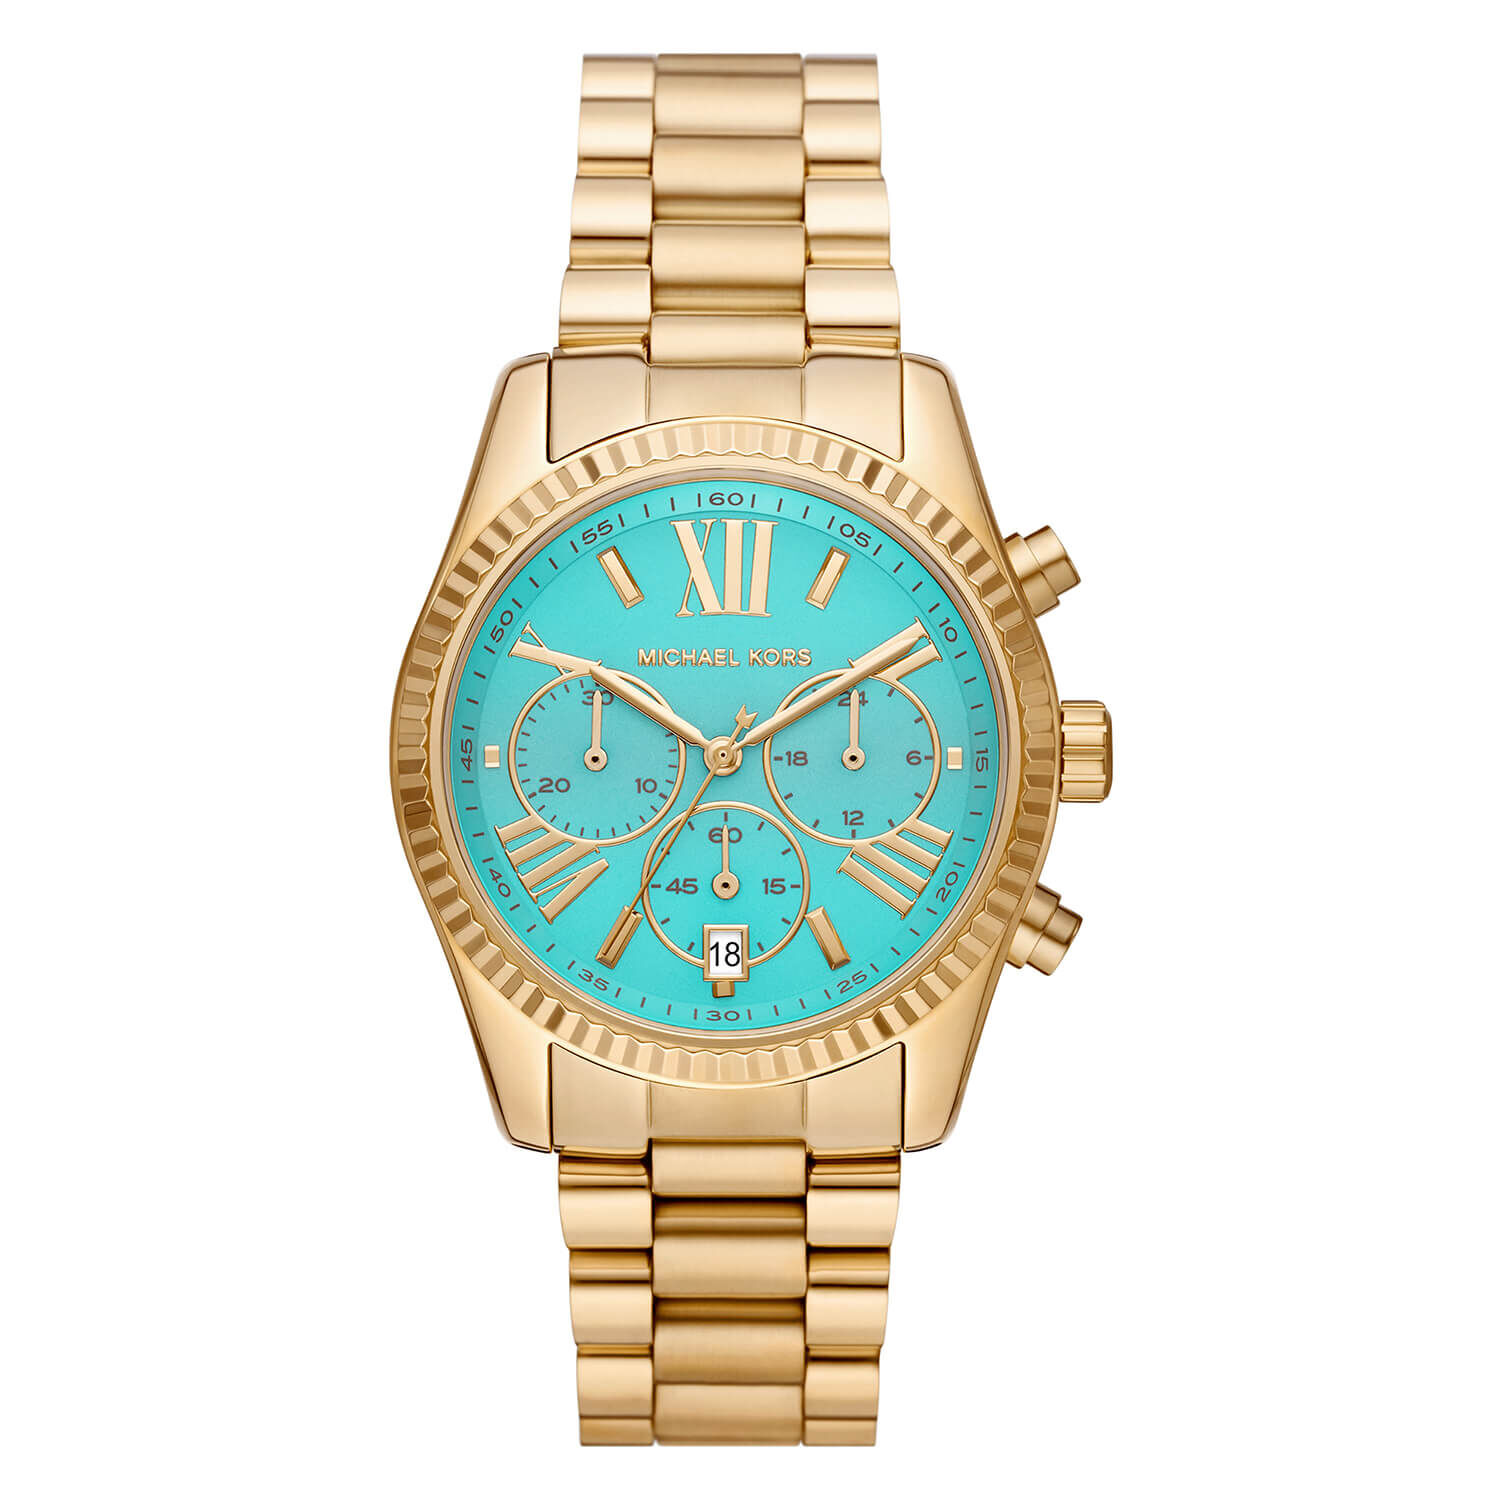 Michael Kors Ladies Slim Runway Watch gold with blue mother of pearl face   eBay